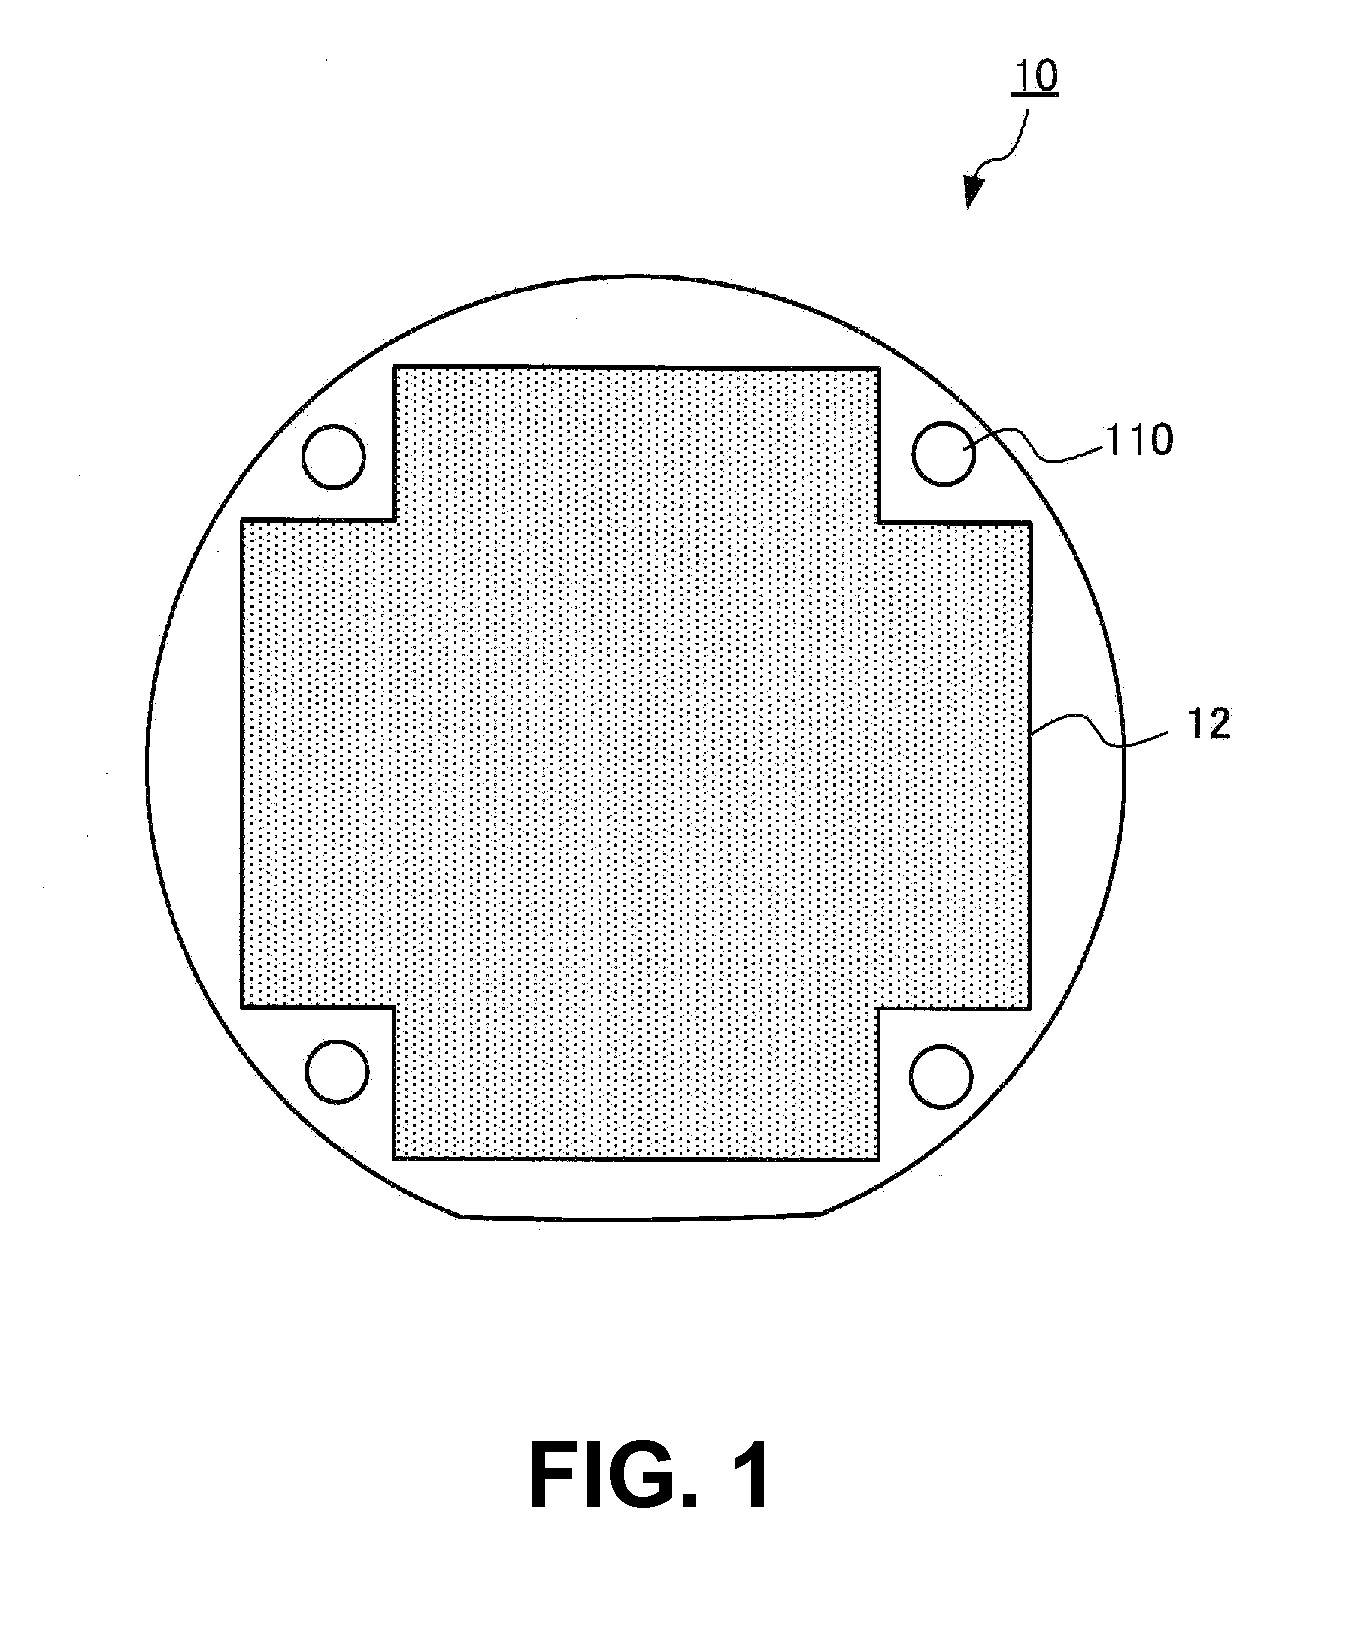 Method of producing semiconductor device and soq (silicon on quartz) substrate used in the method